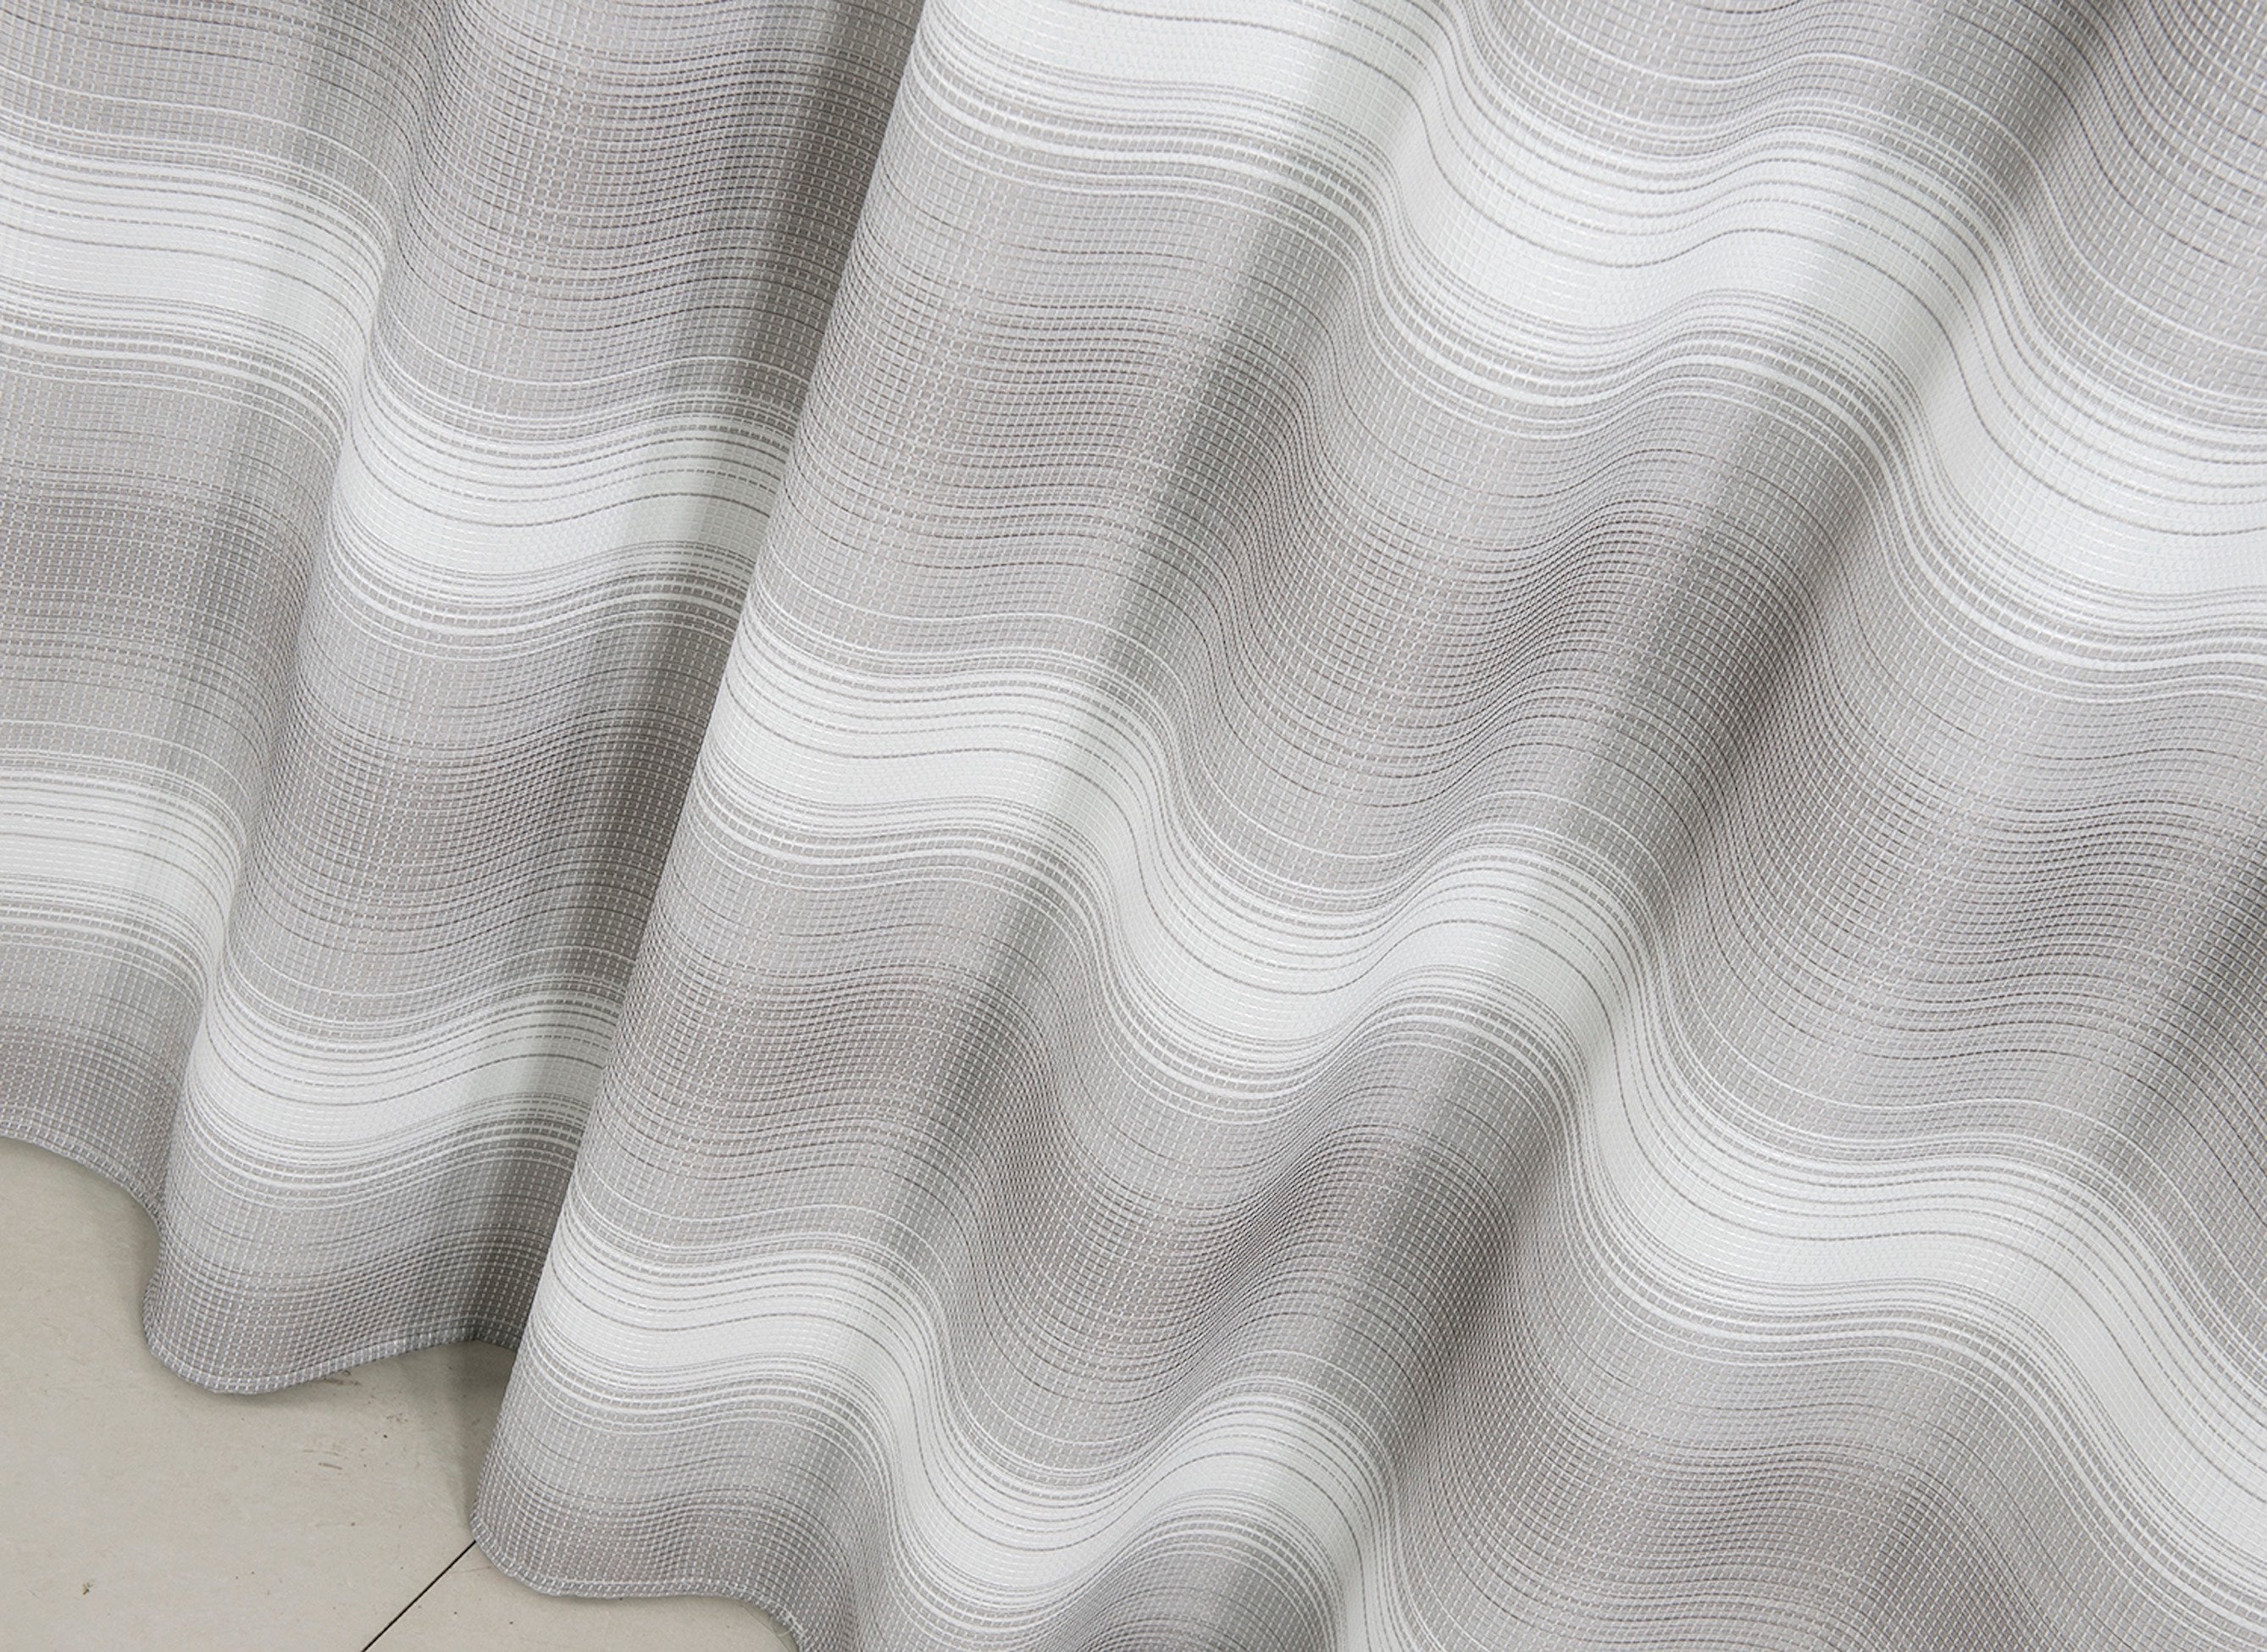 Dainty Home Mirage Micro Plaid Striped Waffle Weave Fabric Shower Curtain